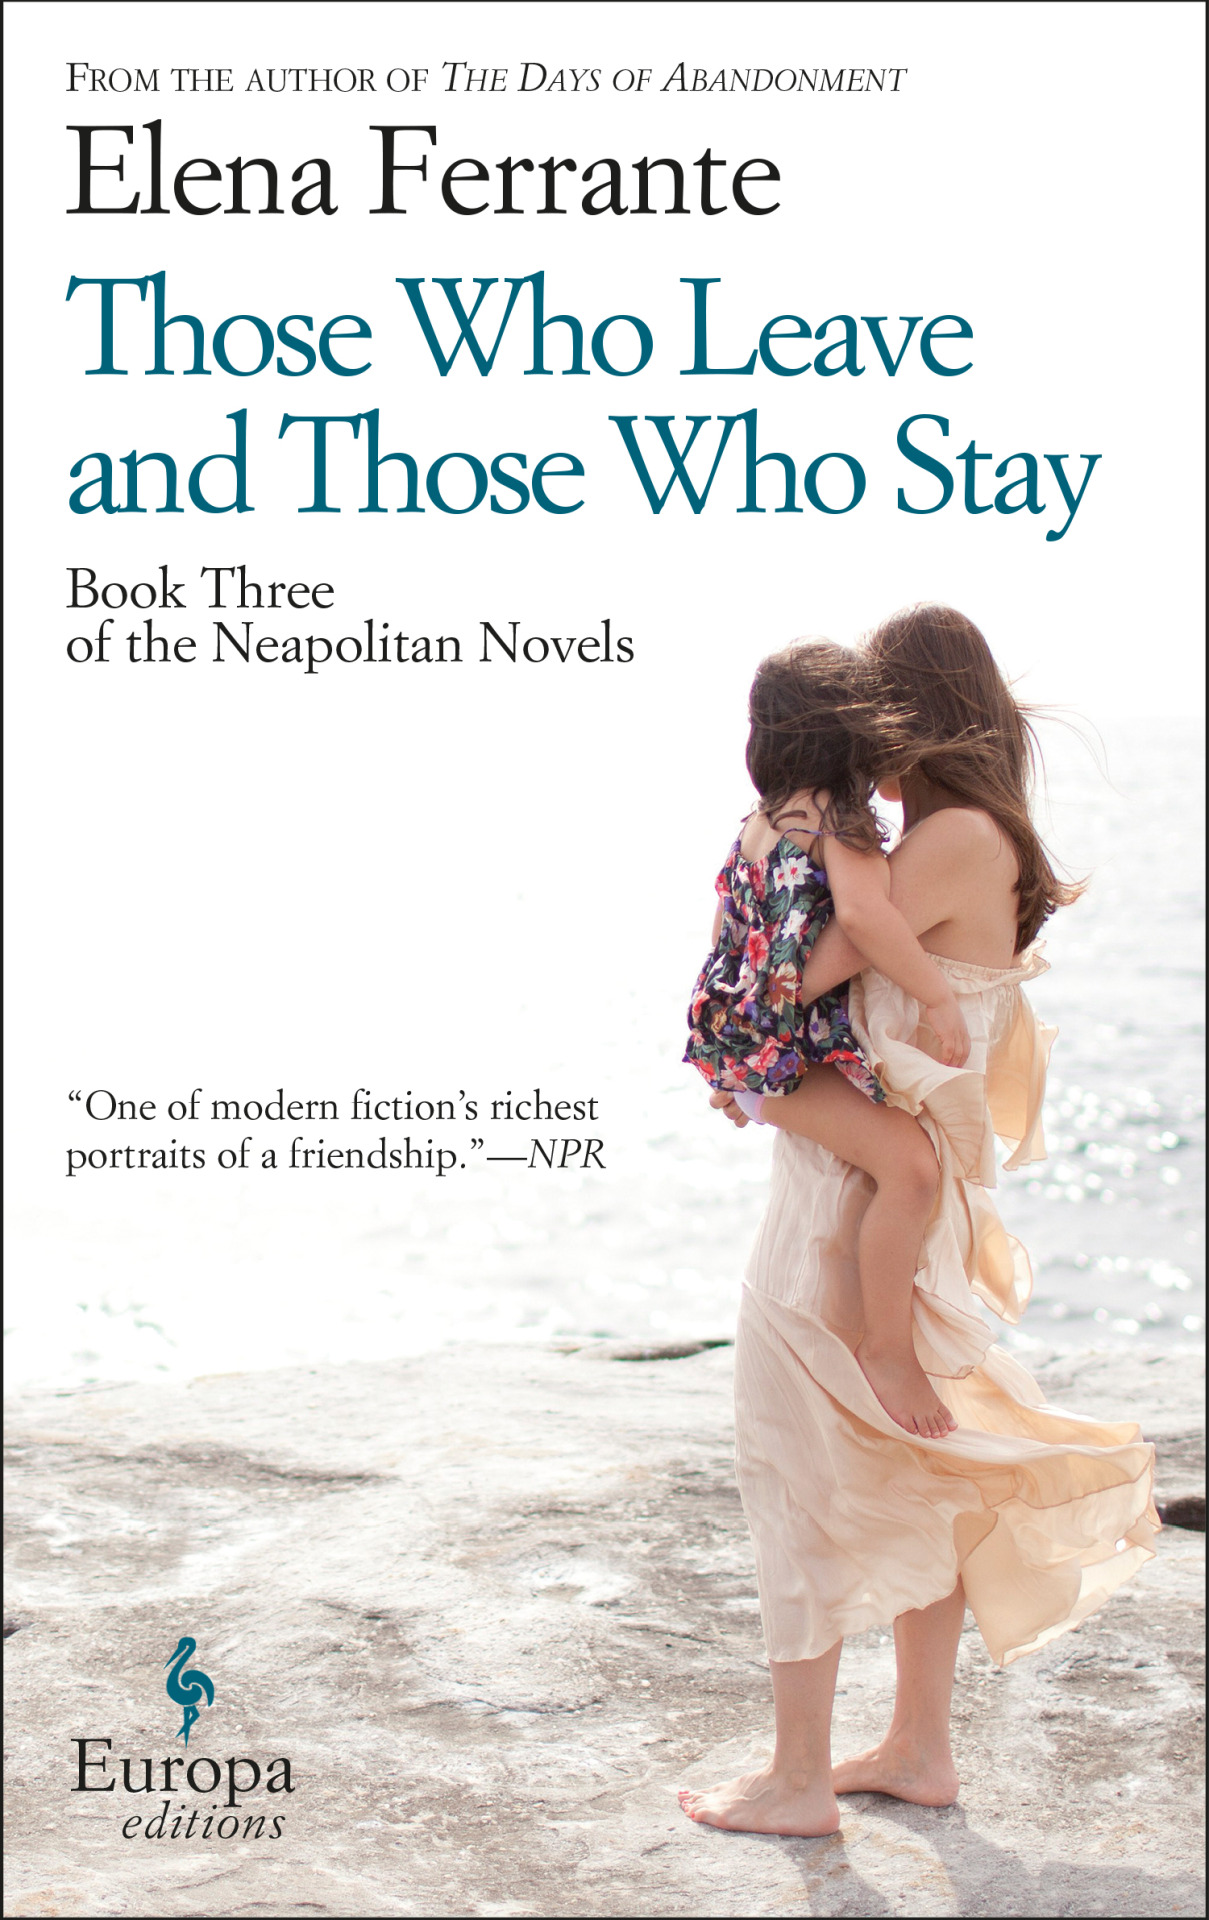 Started #reading Those Who Leave and Those Who Stay, by Elena Ferrante.